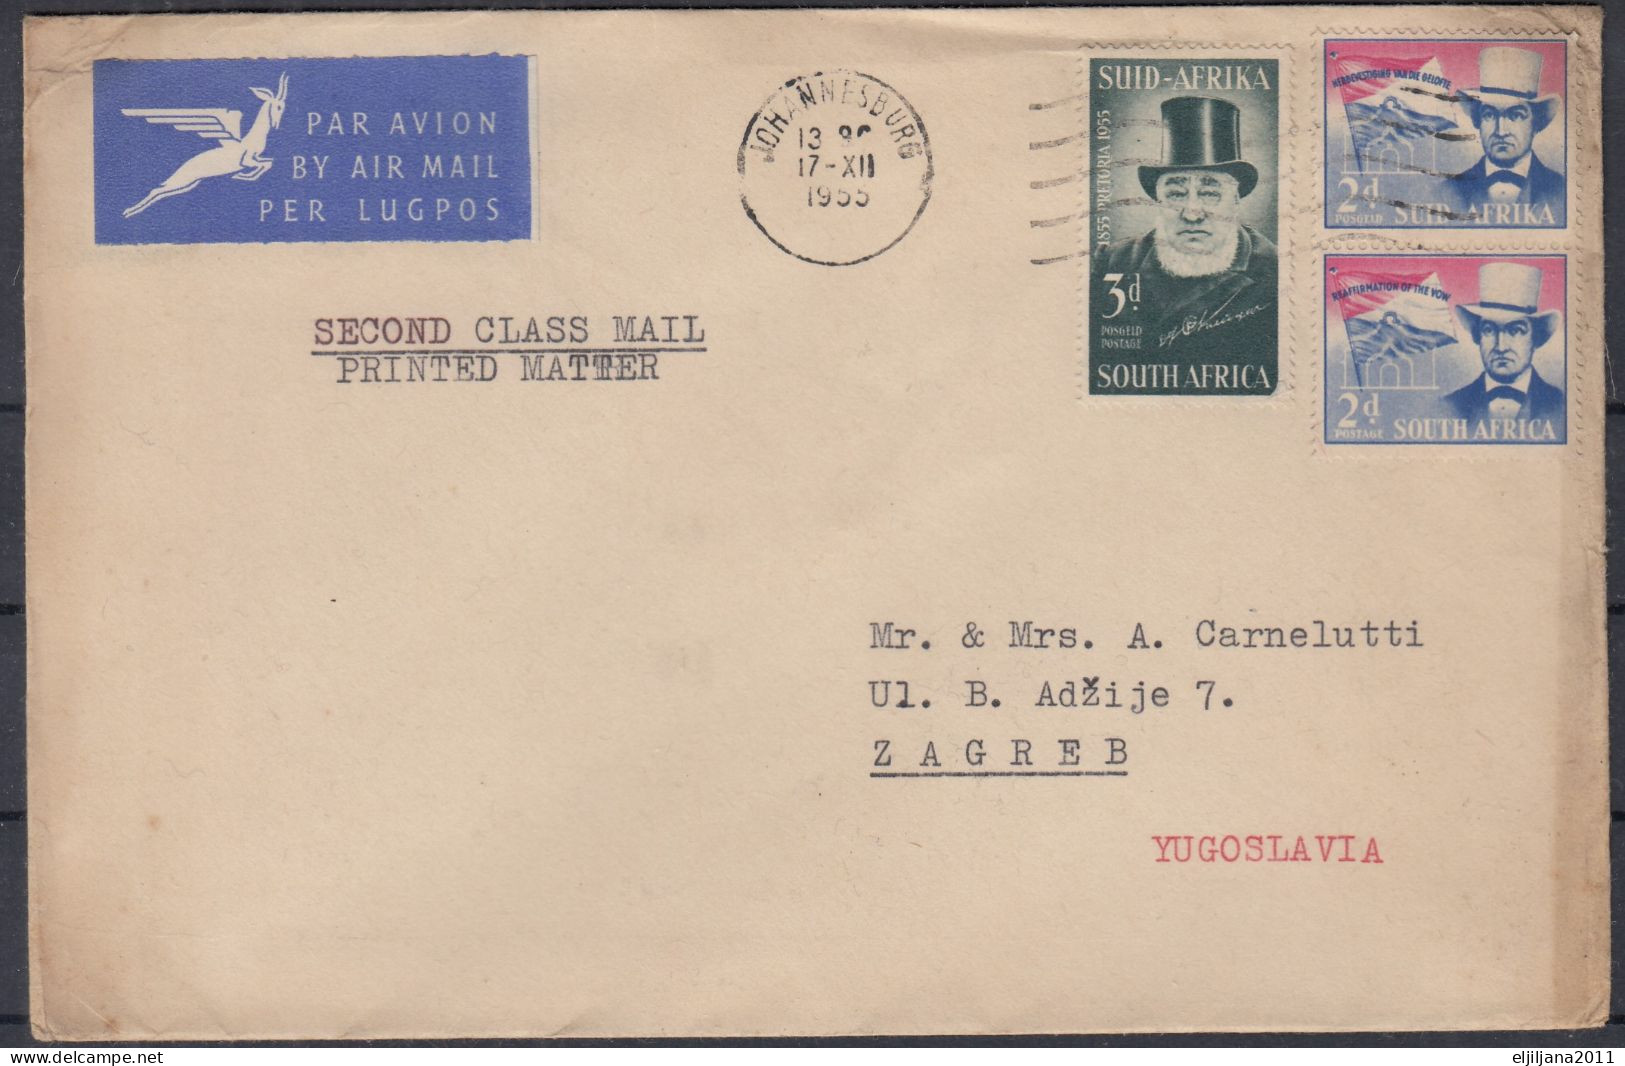 ⁕ Suid Afrika - South Africa 1955 ⁕ Nice Cover - Airmail Johannesburg To Zagreb ⁕ Csan - Briefe U. Dokumente